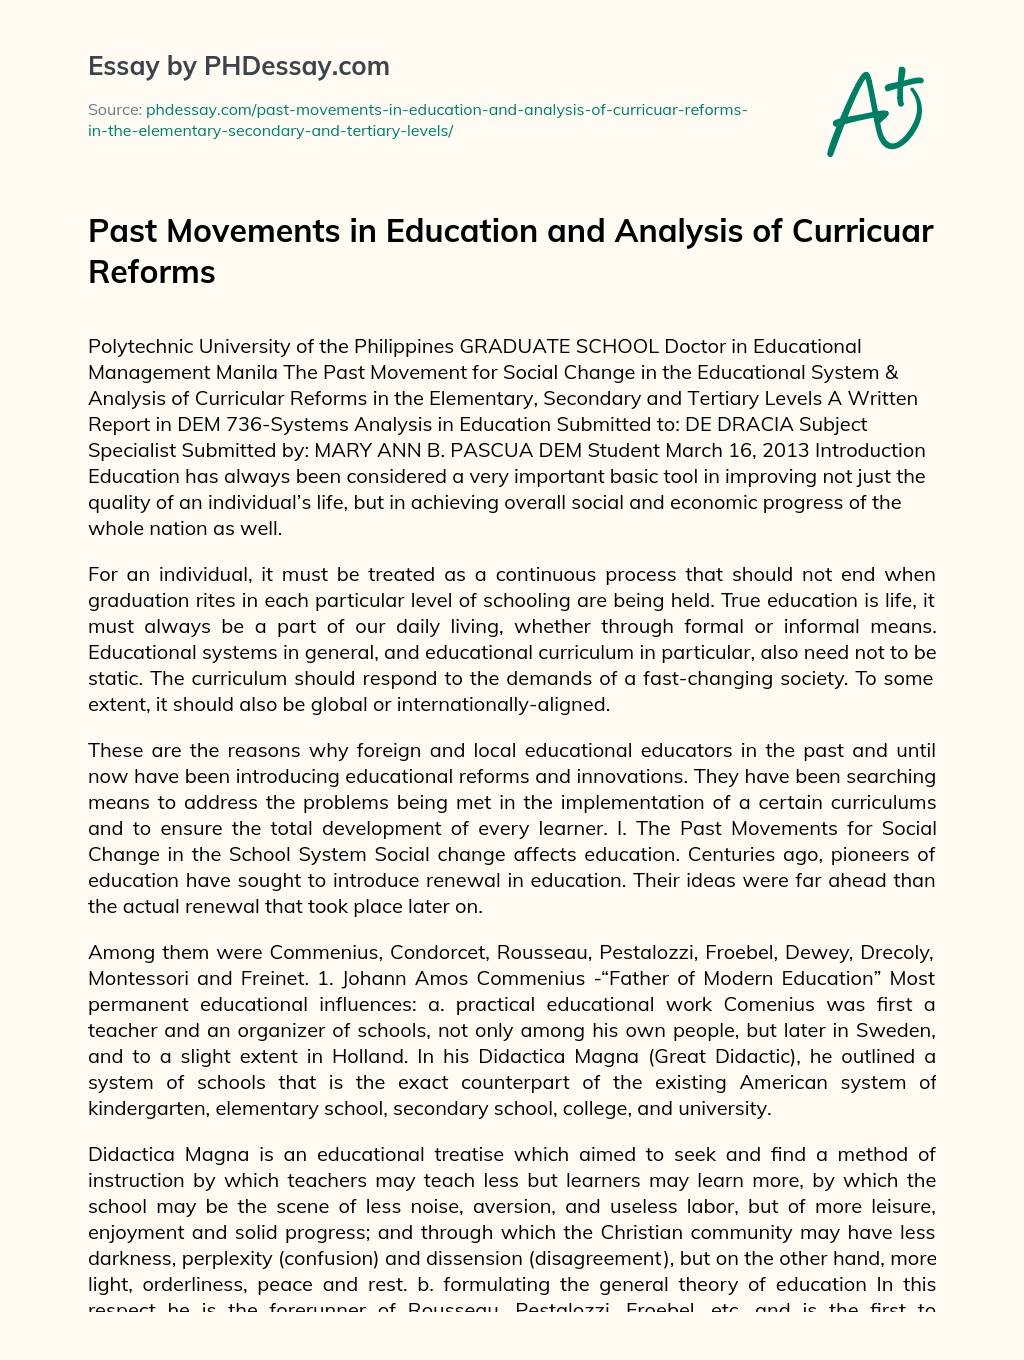 Past Movements in Education and Analysis of Curricuar Reforms essay